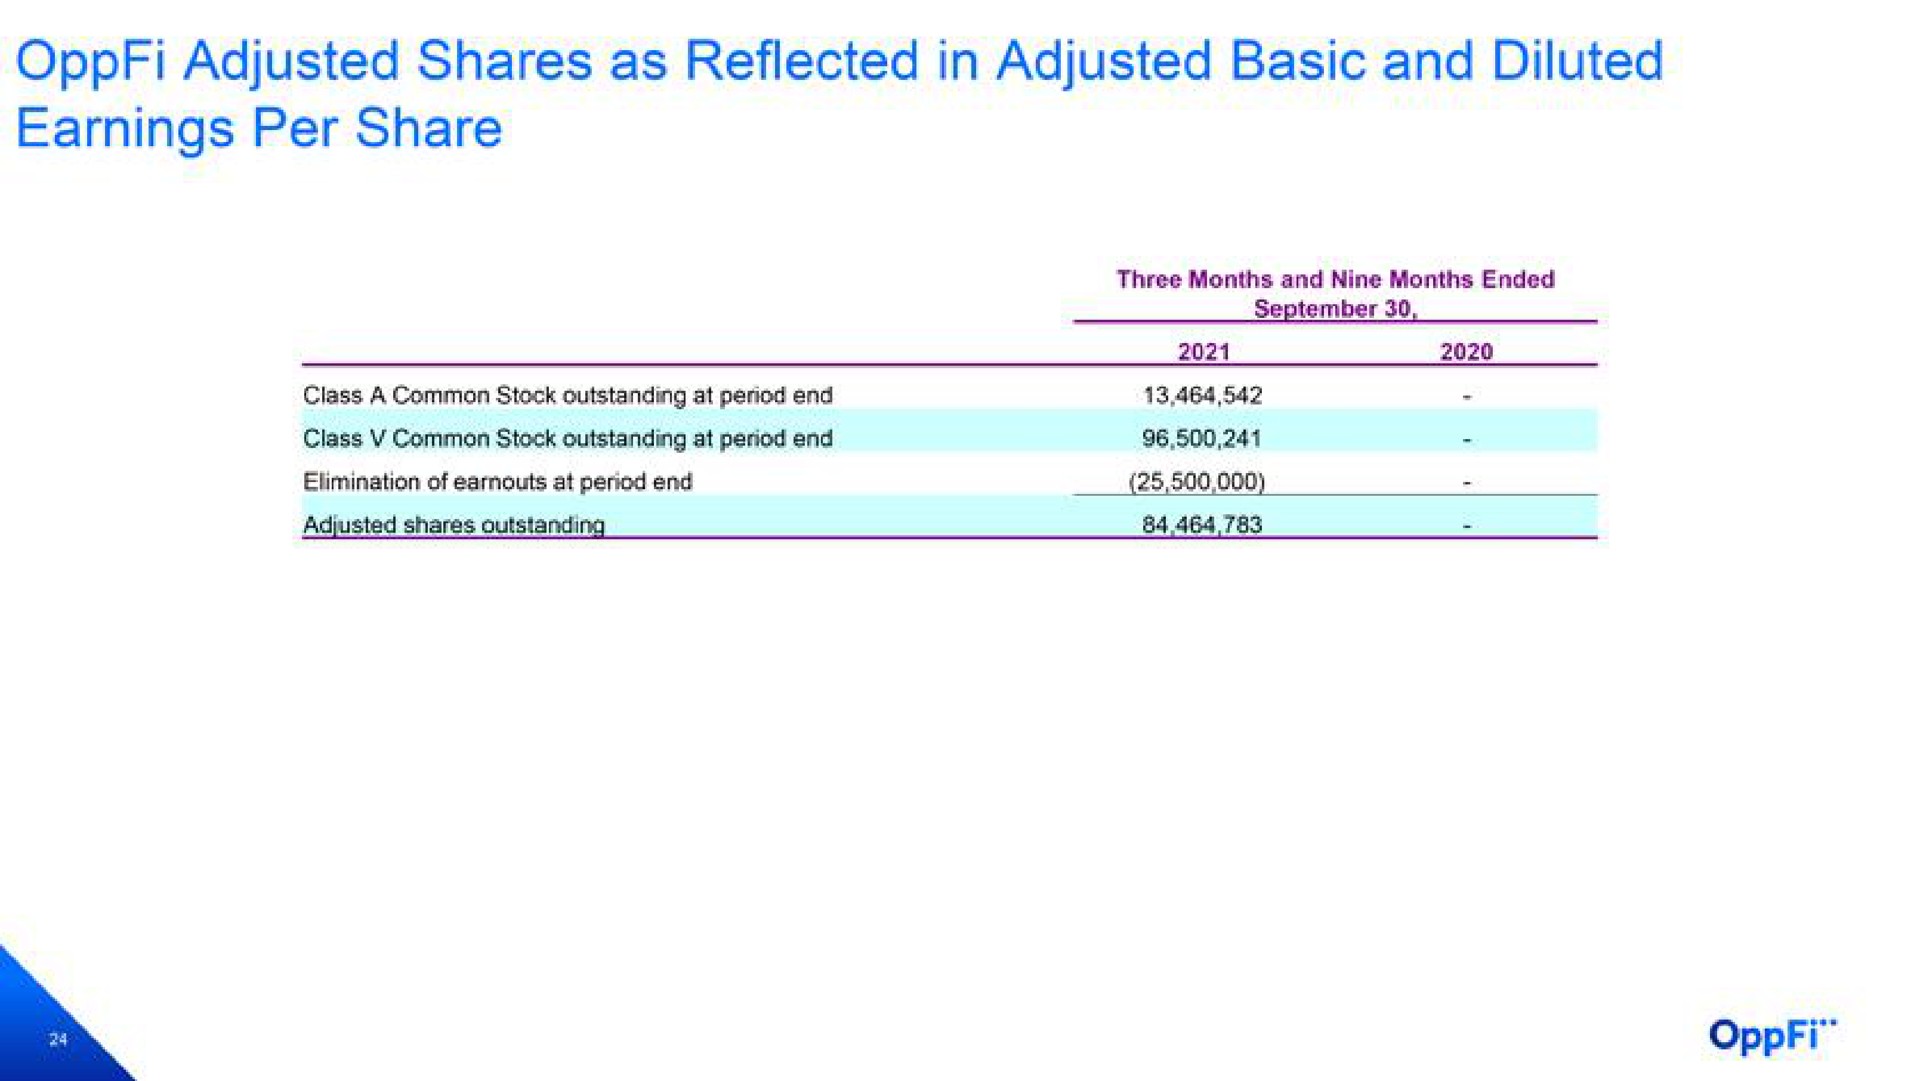 adjusted shares as reflected in adjusted basic and diluted earnings per share | OppFi